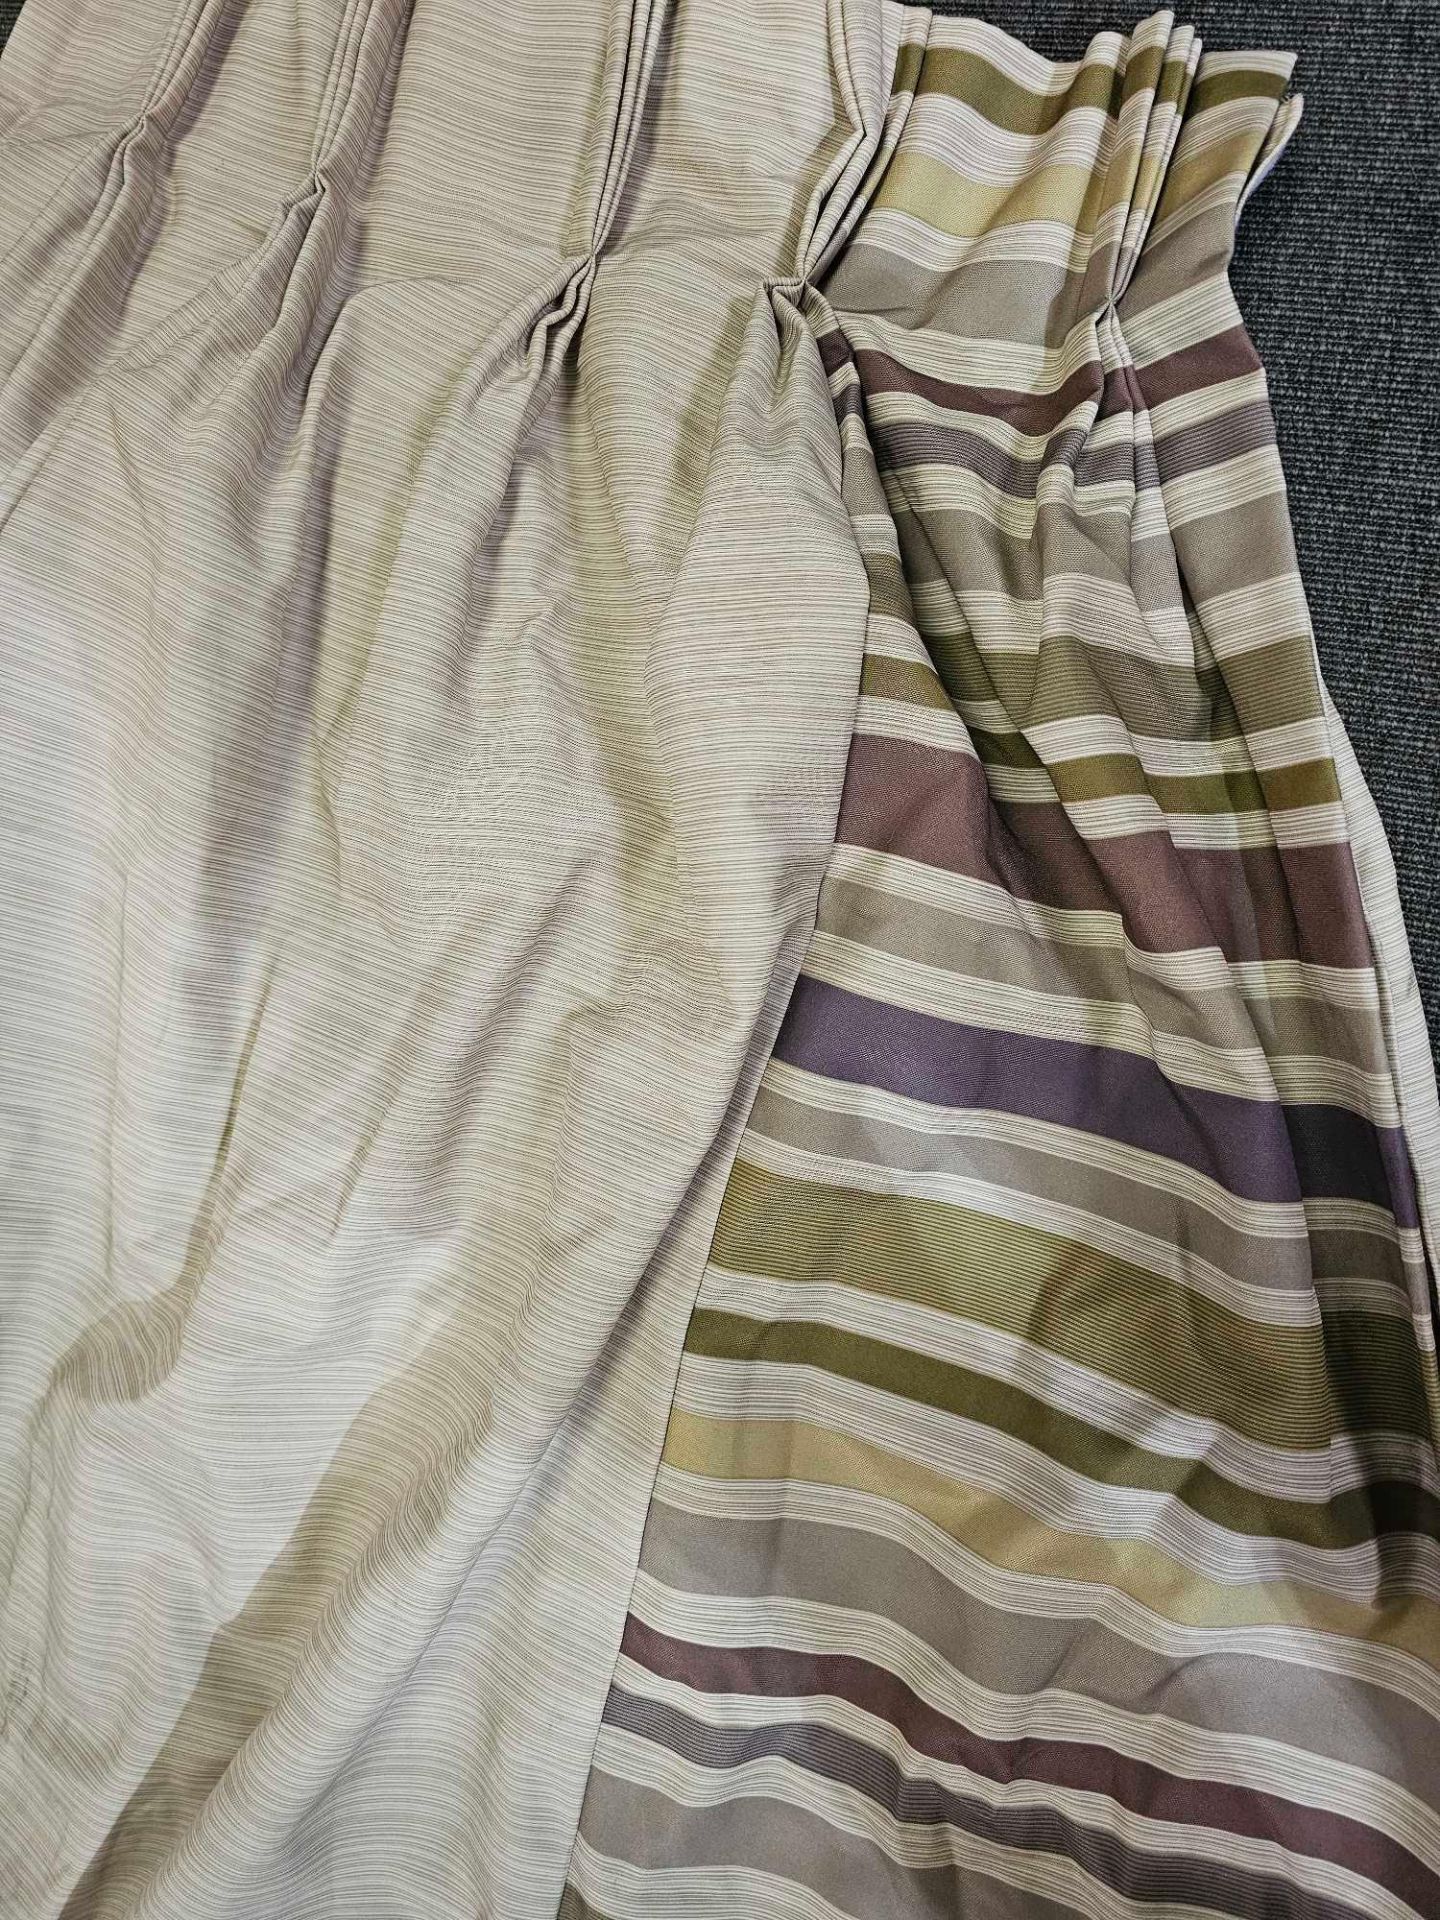 A Pair Of Curtains Striped Edge Purple/Green/Beige/Lime/Brown Size 284 x 250cm ( Ref Red 157) - Image 2 of 2